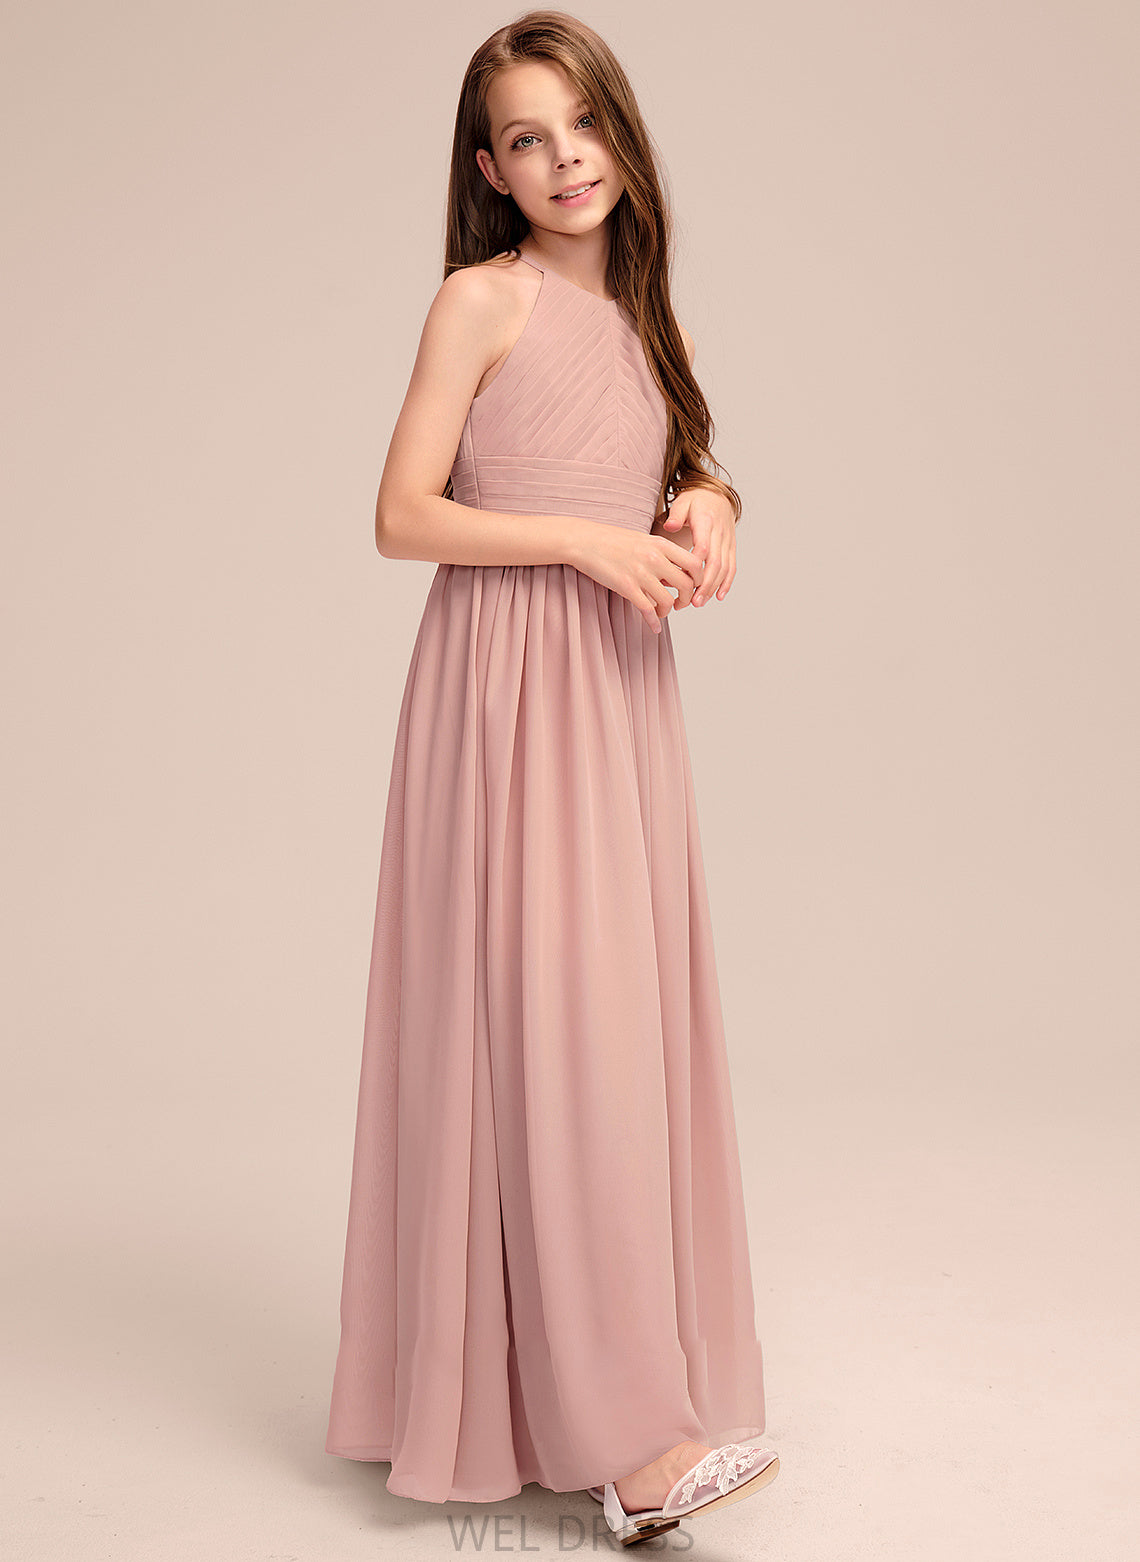 Scoop A-Line Junior Bridesmaid Dresses Neck Ruffle With Chiffon Willow Floor-Length